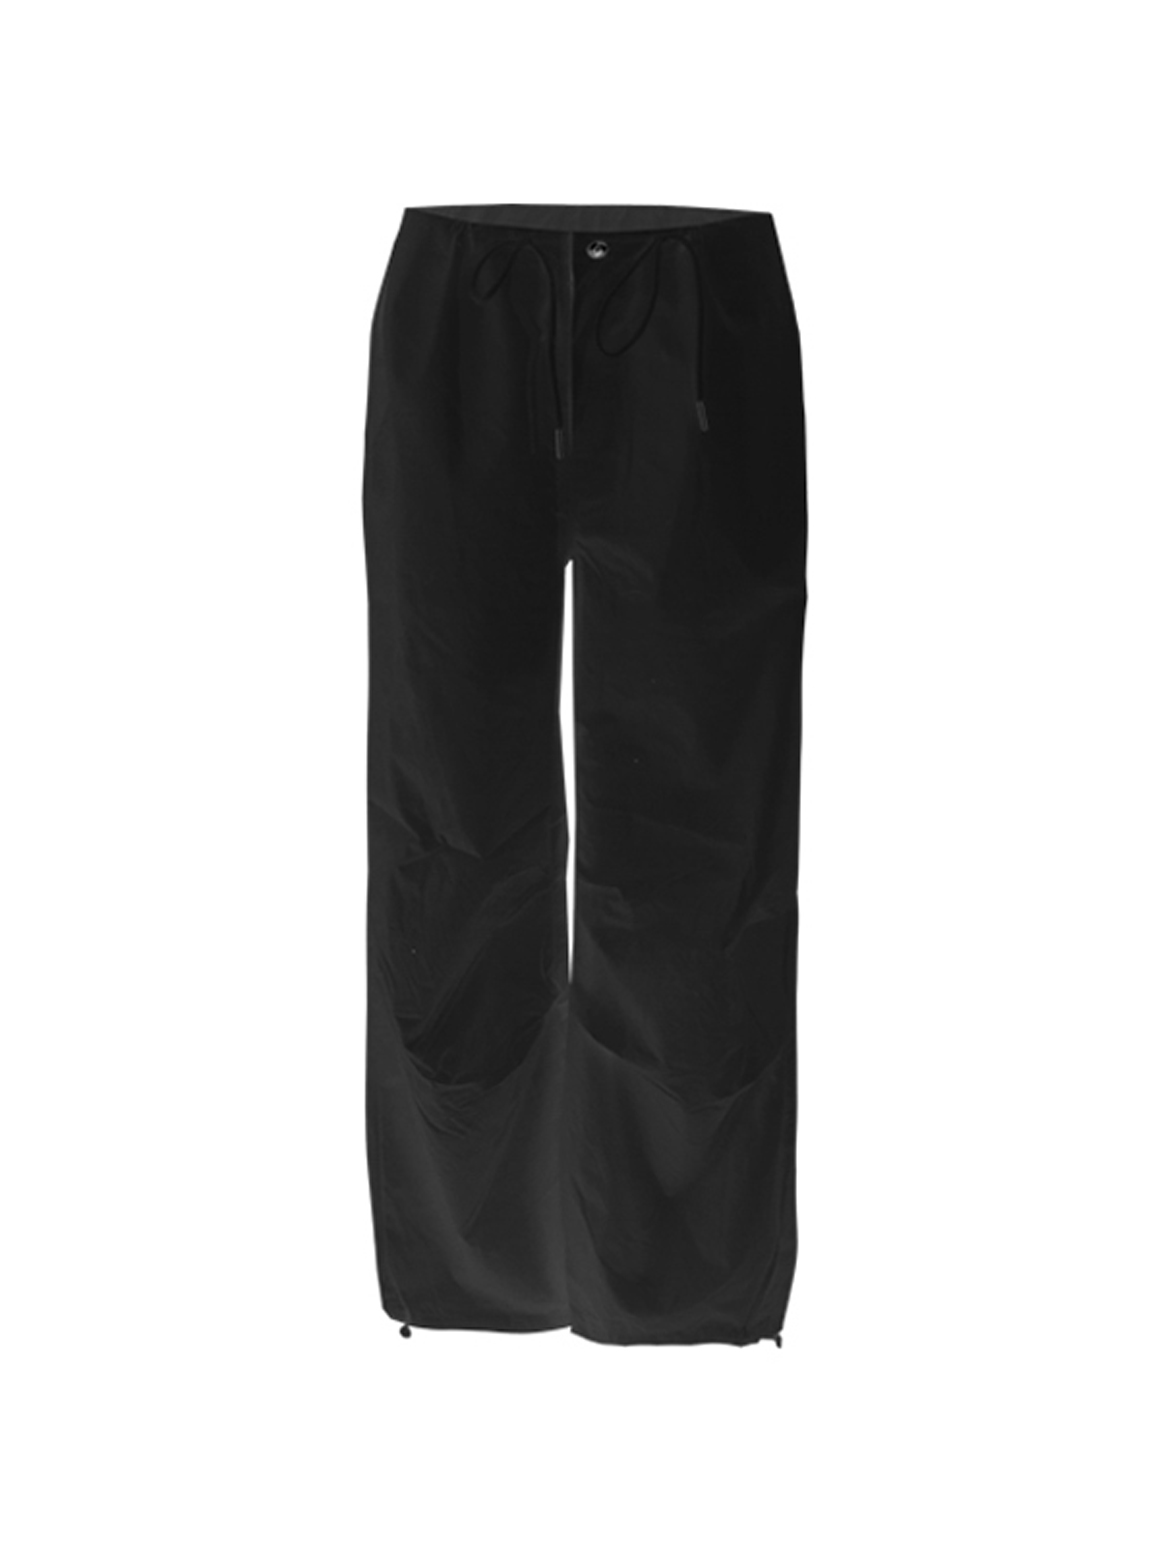 [ODOR MADE] Archive parachute pants